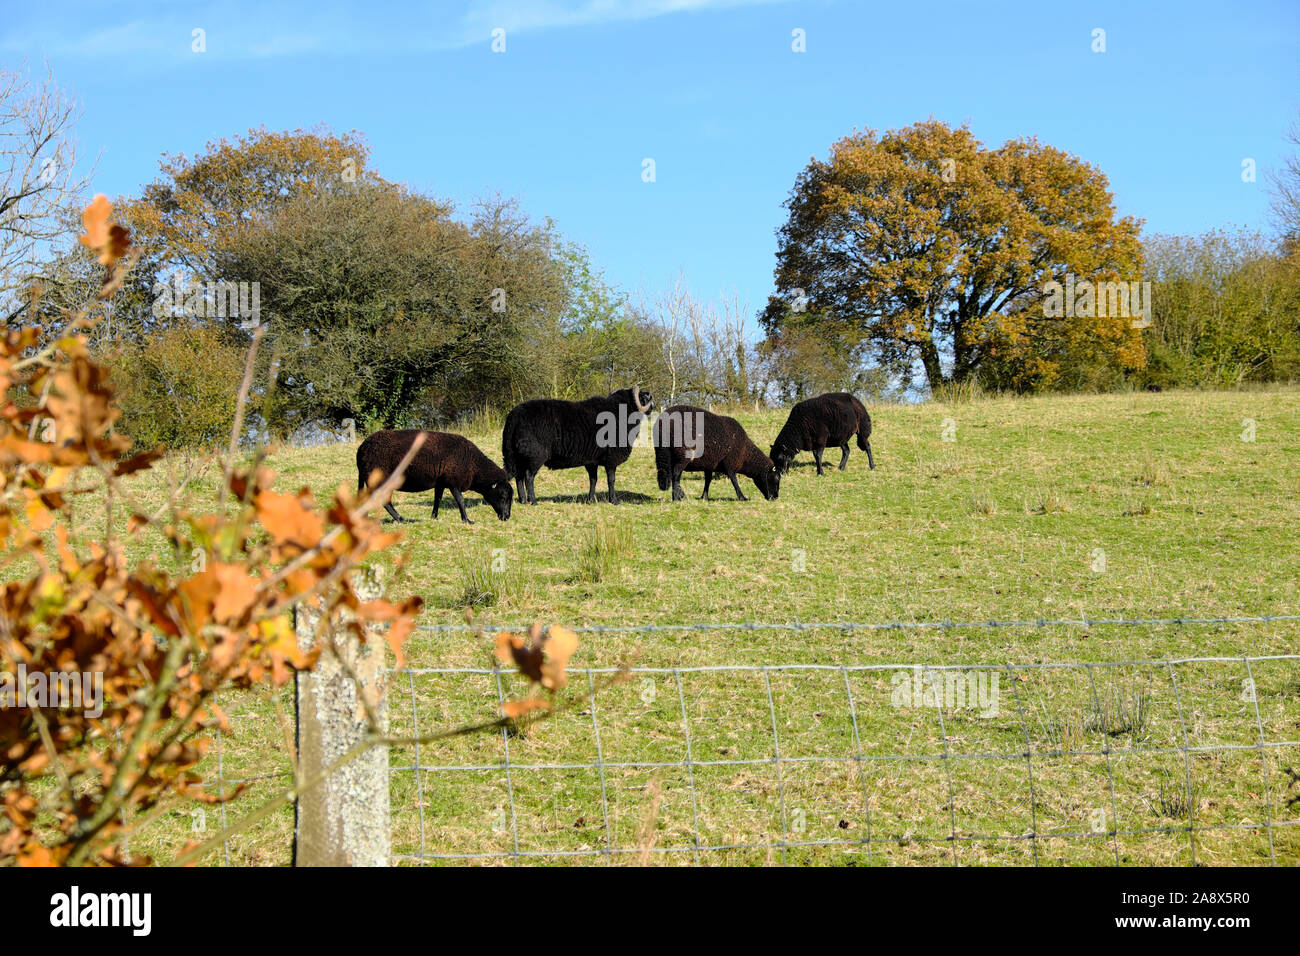 Black sheep with ram grazing in an autumn field in November tupping season on a Welsh farm in Carmarthenshire Wales UK  KATHY DEWITT Stock Photo